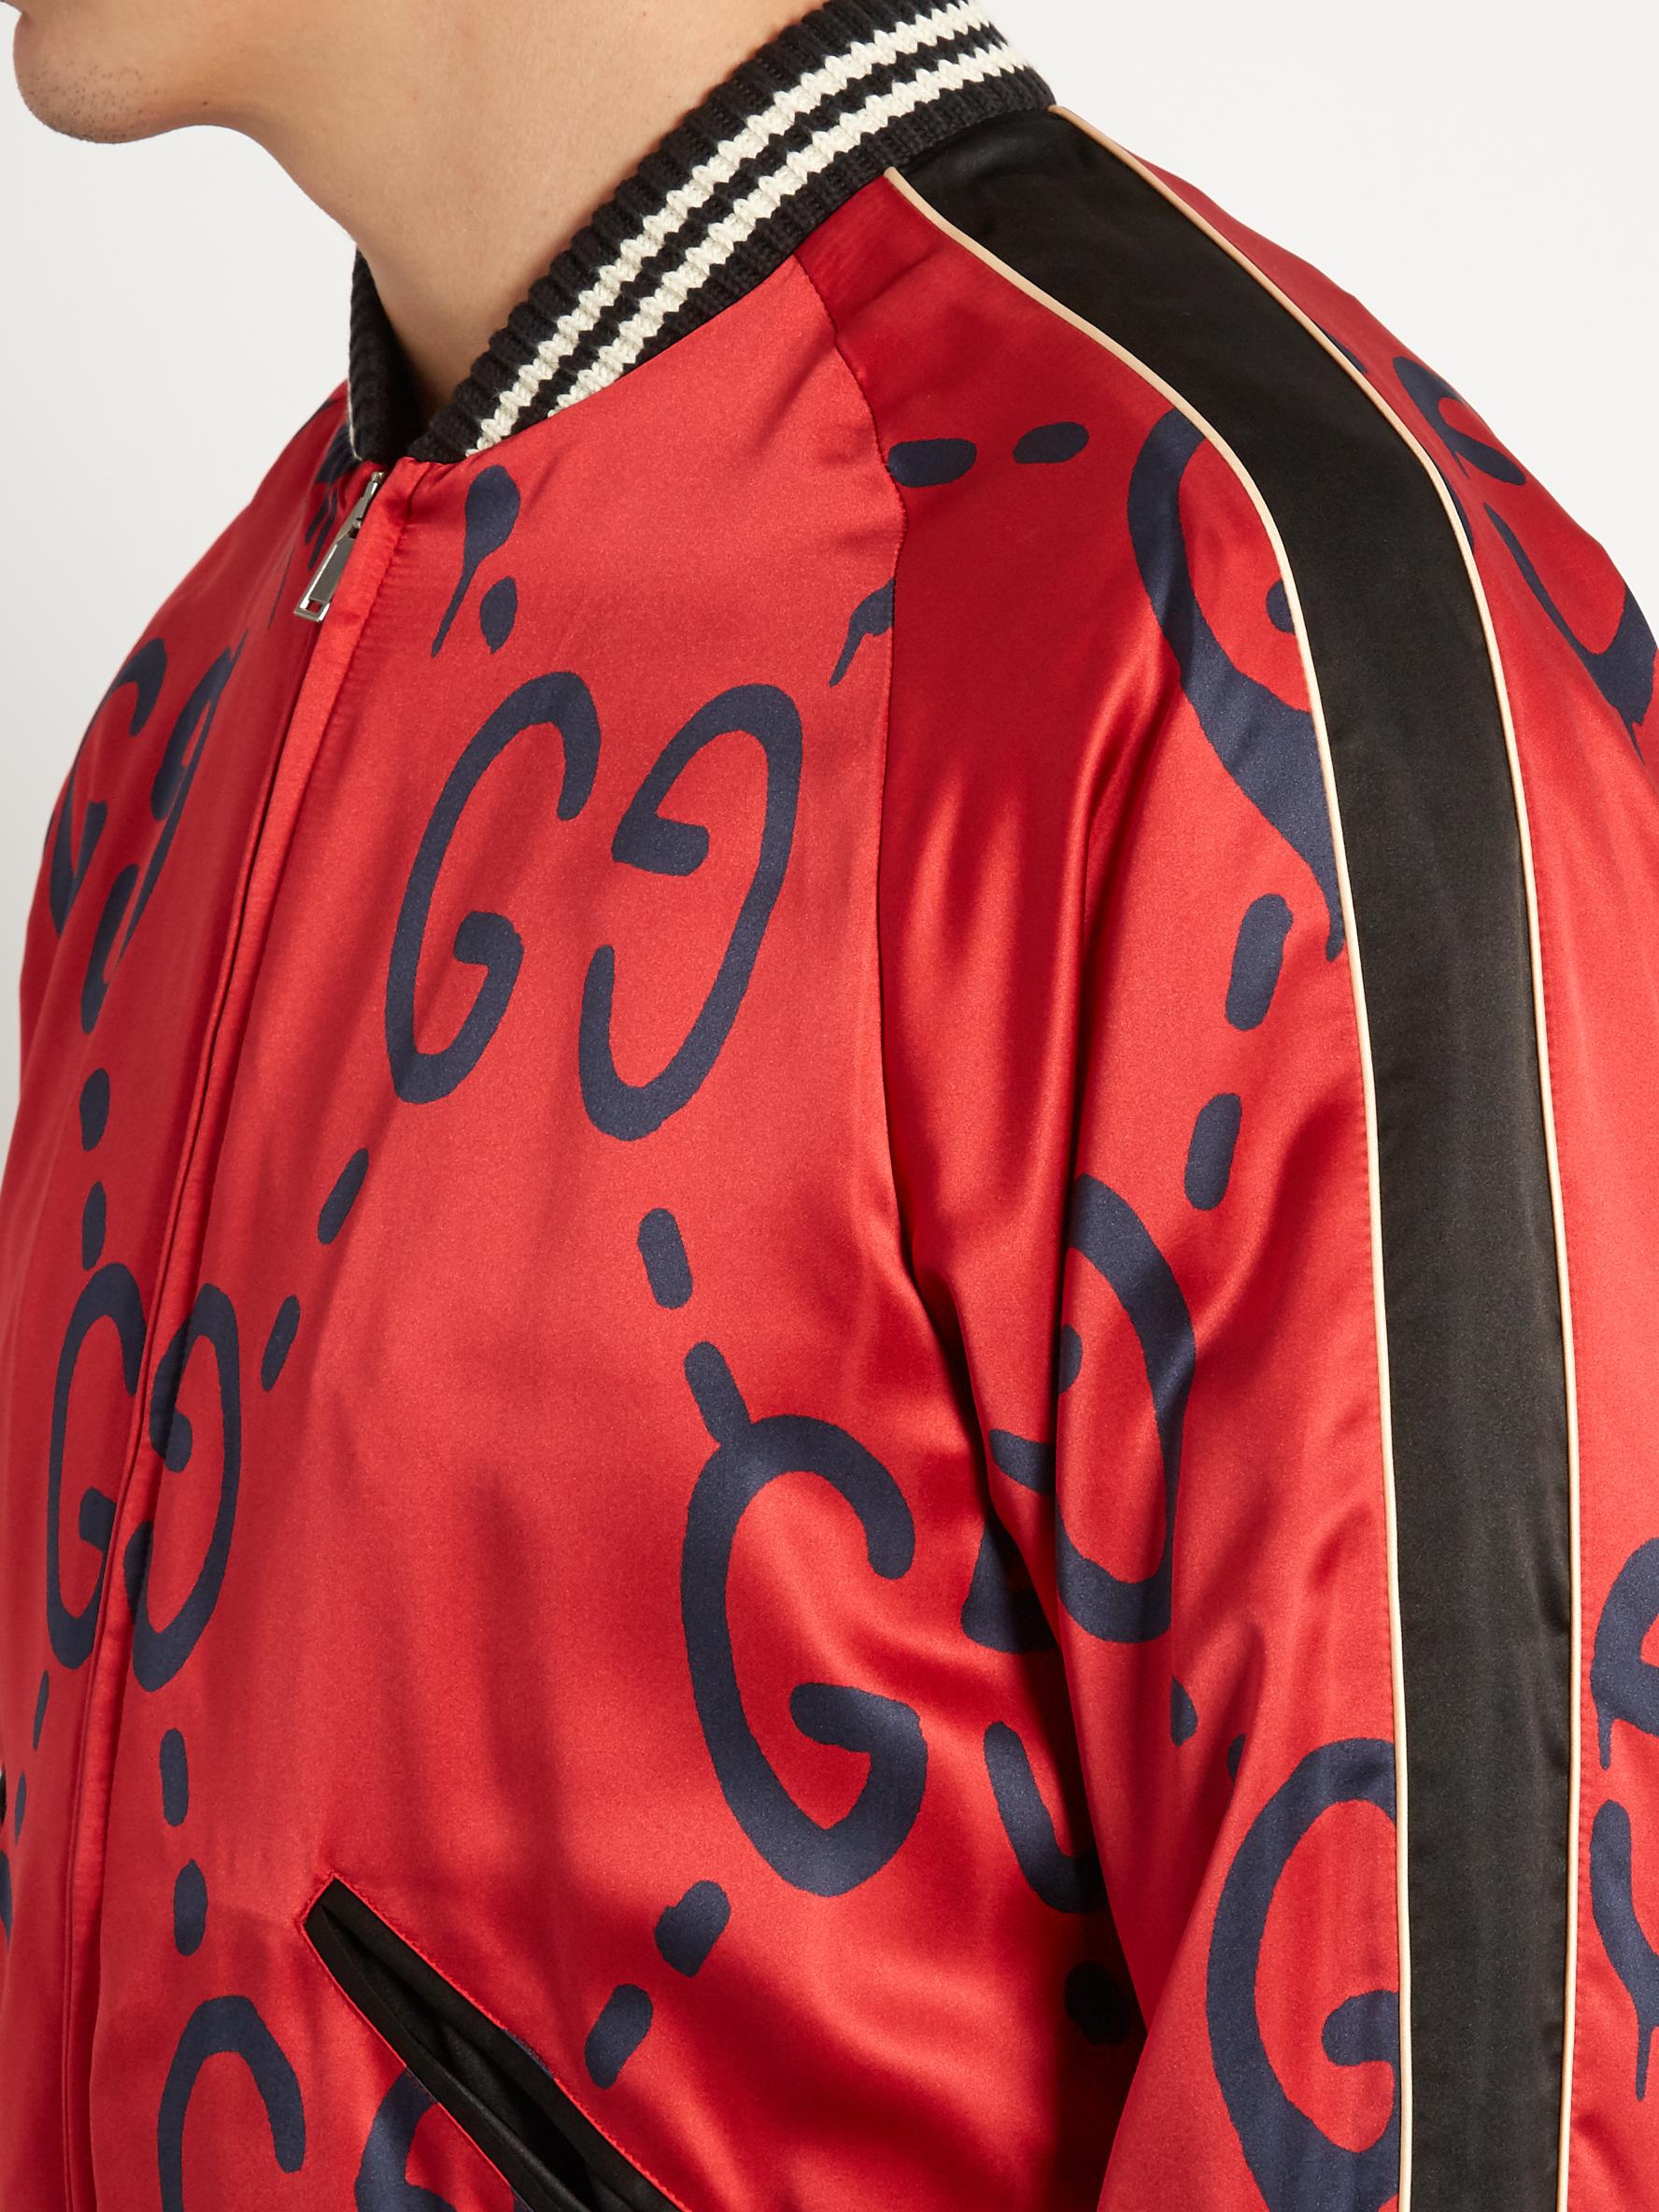 Gucci Ghost-print Satin Duchesse Bomber Jacket in Red for Men - Lyst